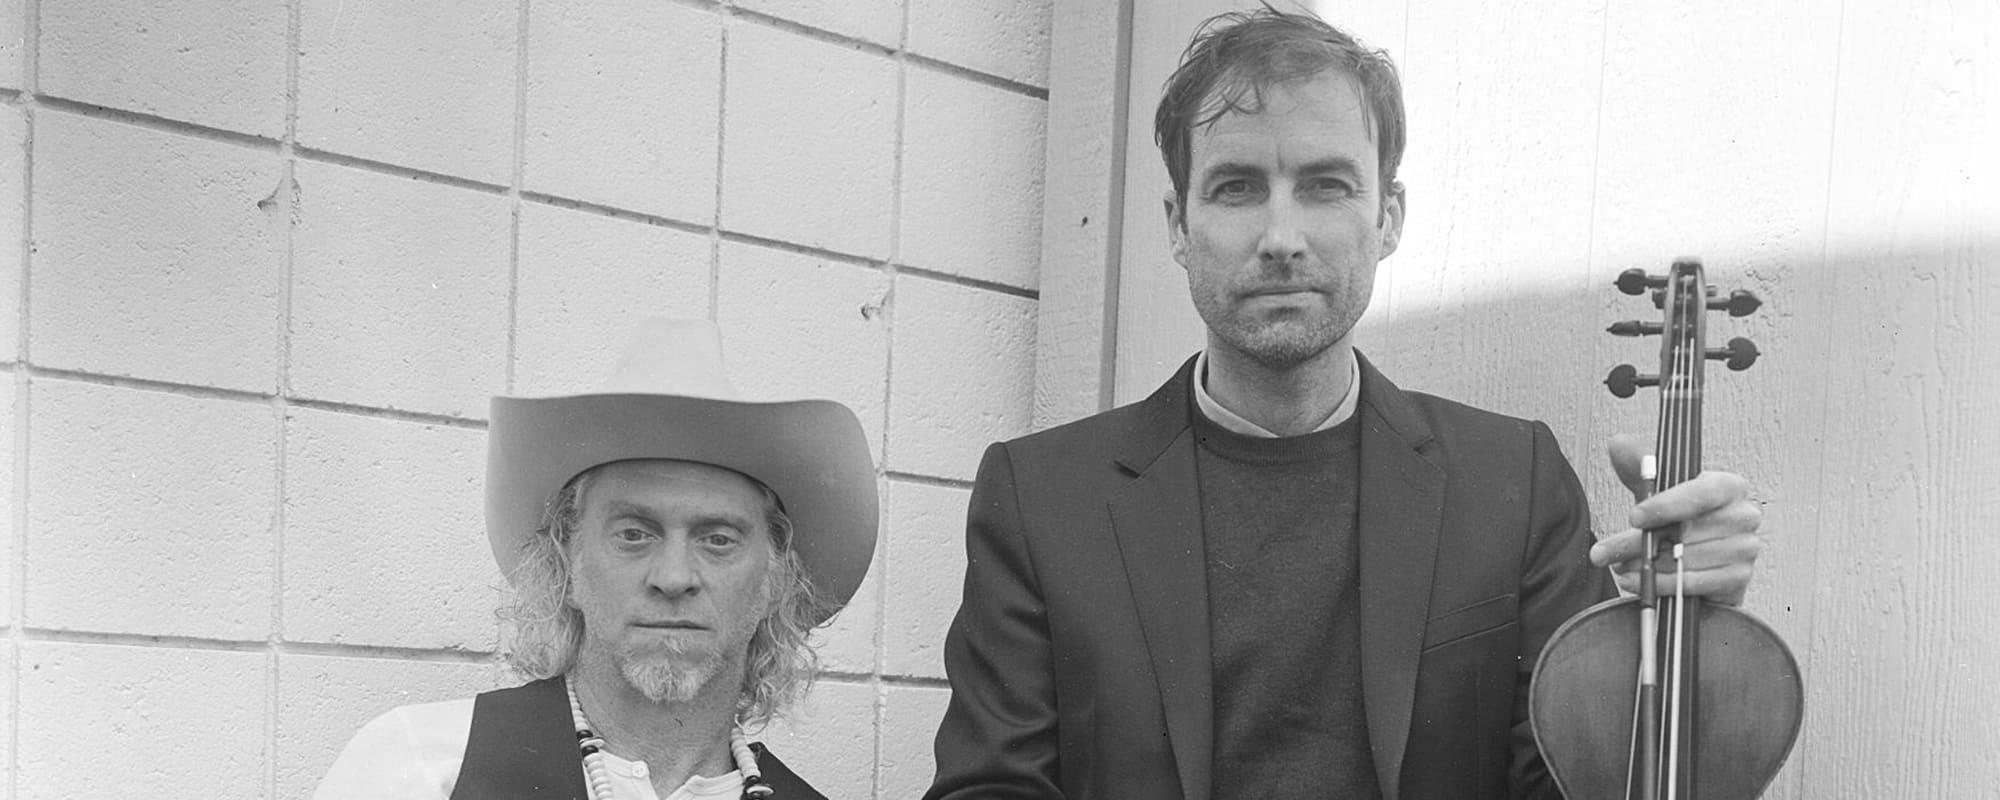 Fastidious Folk From A Pair of Mournful Minstrels, Jimbo Mathus and Andrew Bird